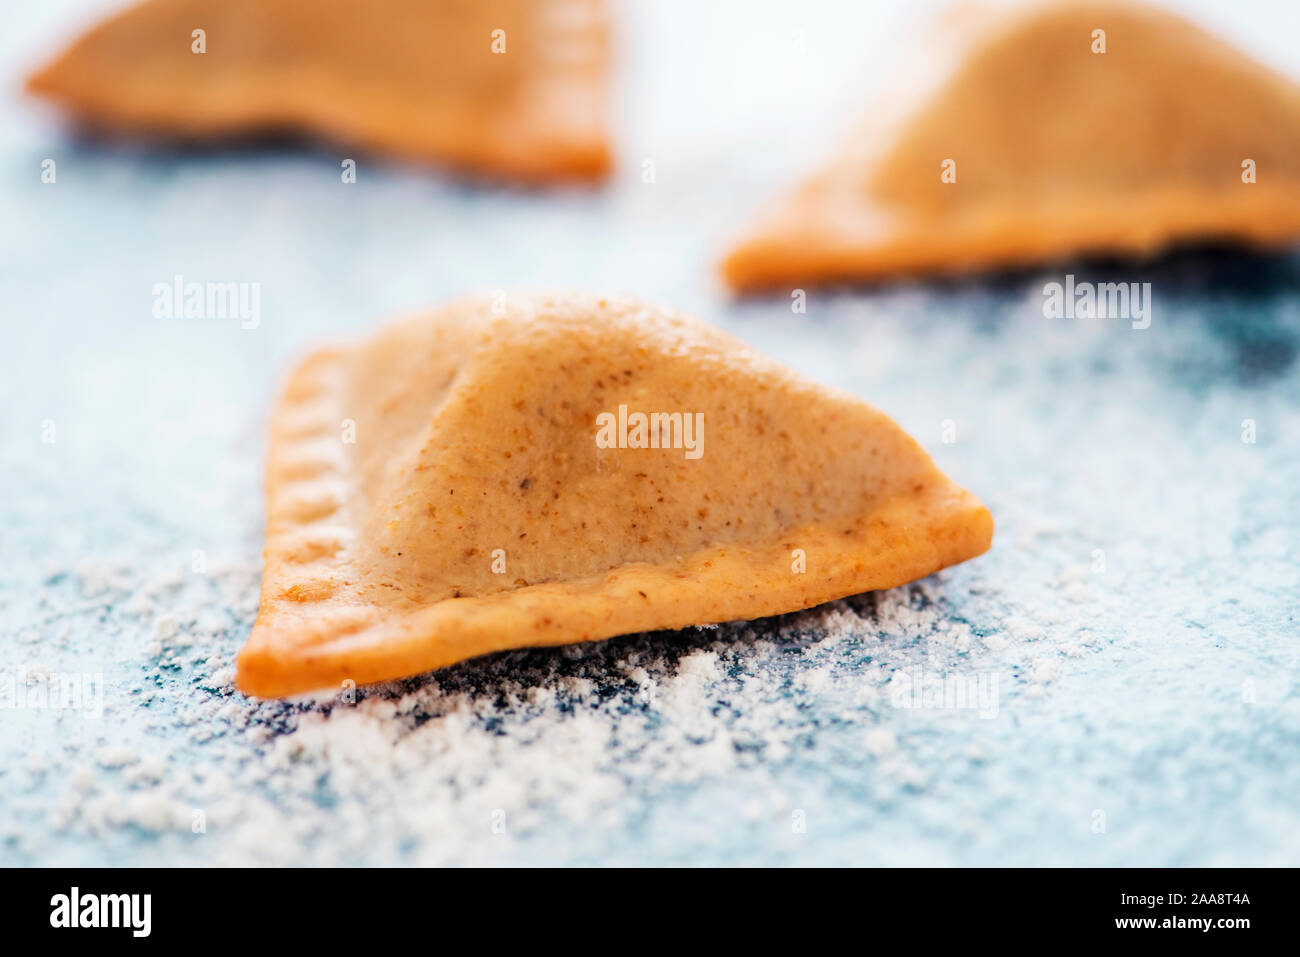 high angle view of some Indian samosas on a marbled stone surface Stock Photo